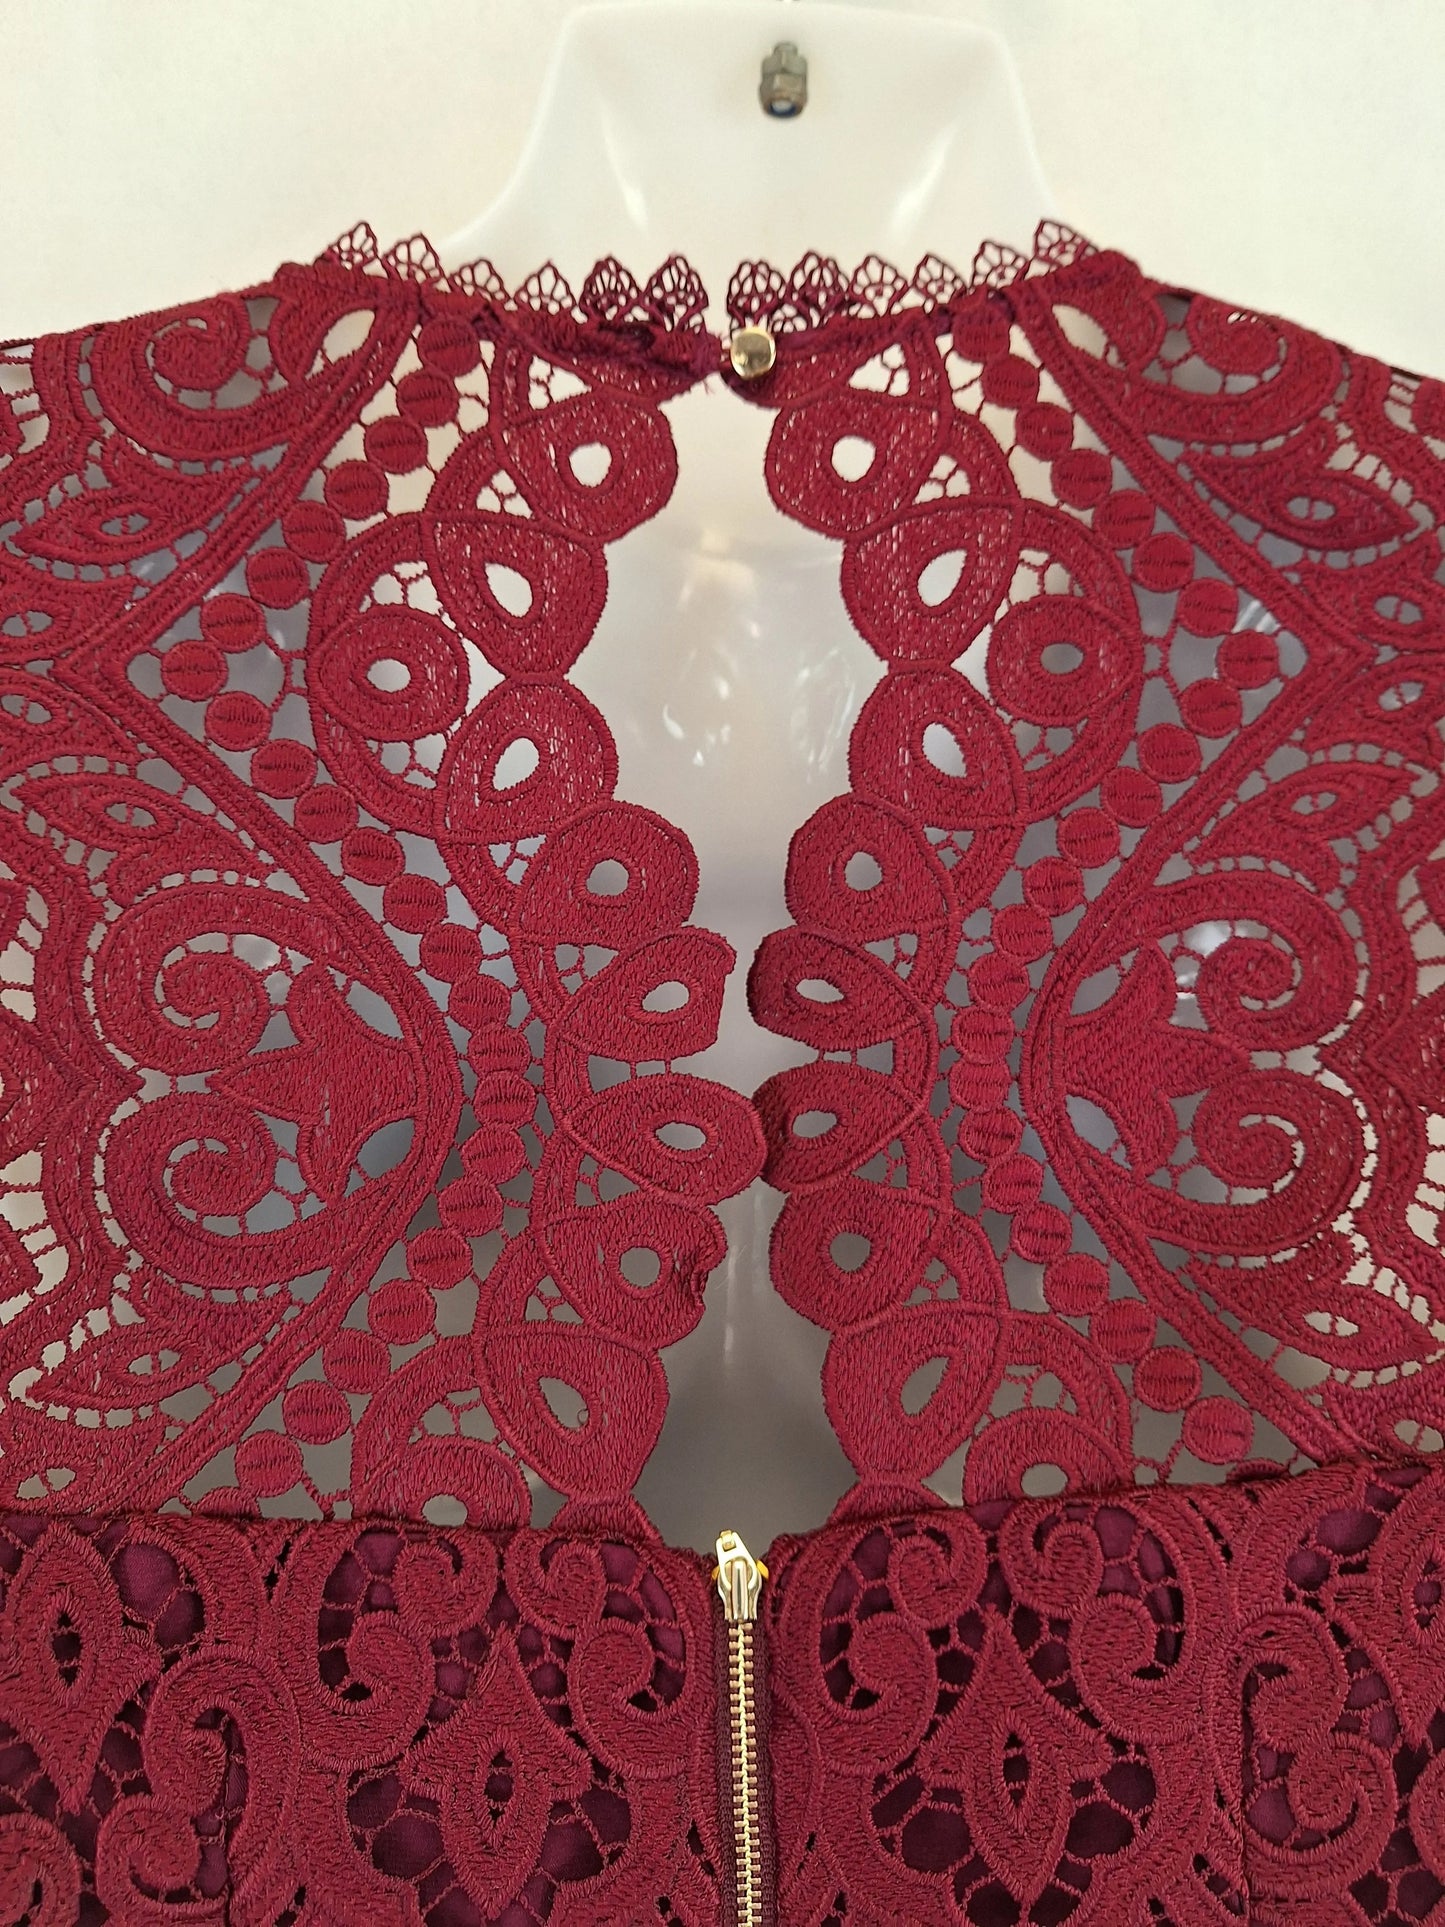 Forever New Burgundy Lace Cocktail Midi Dress Size 10 by SwapUp-Online Second Hand Store-Online Thrift Store